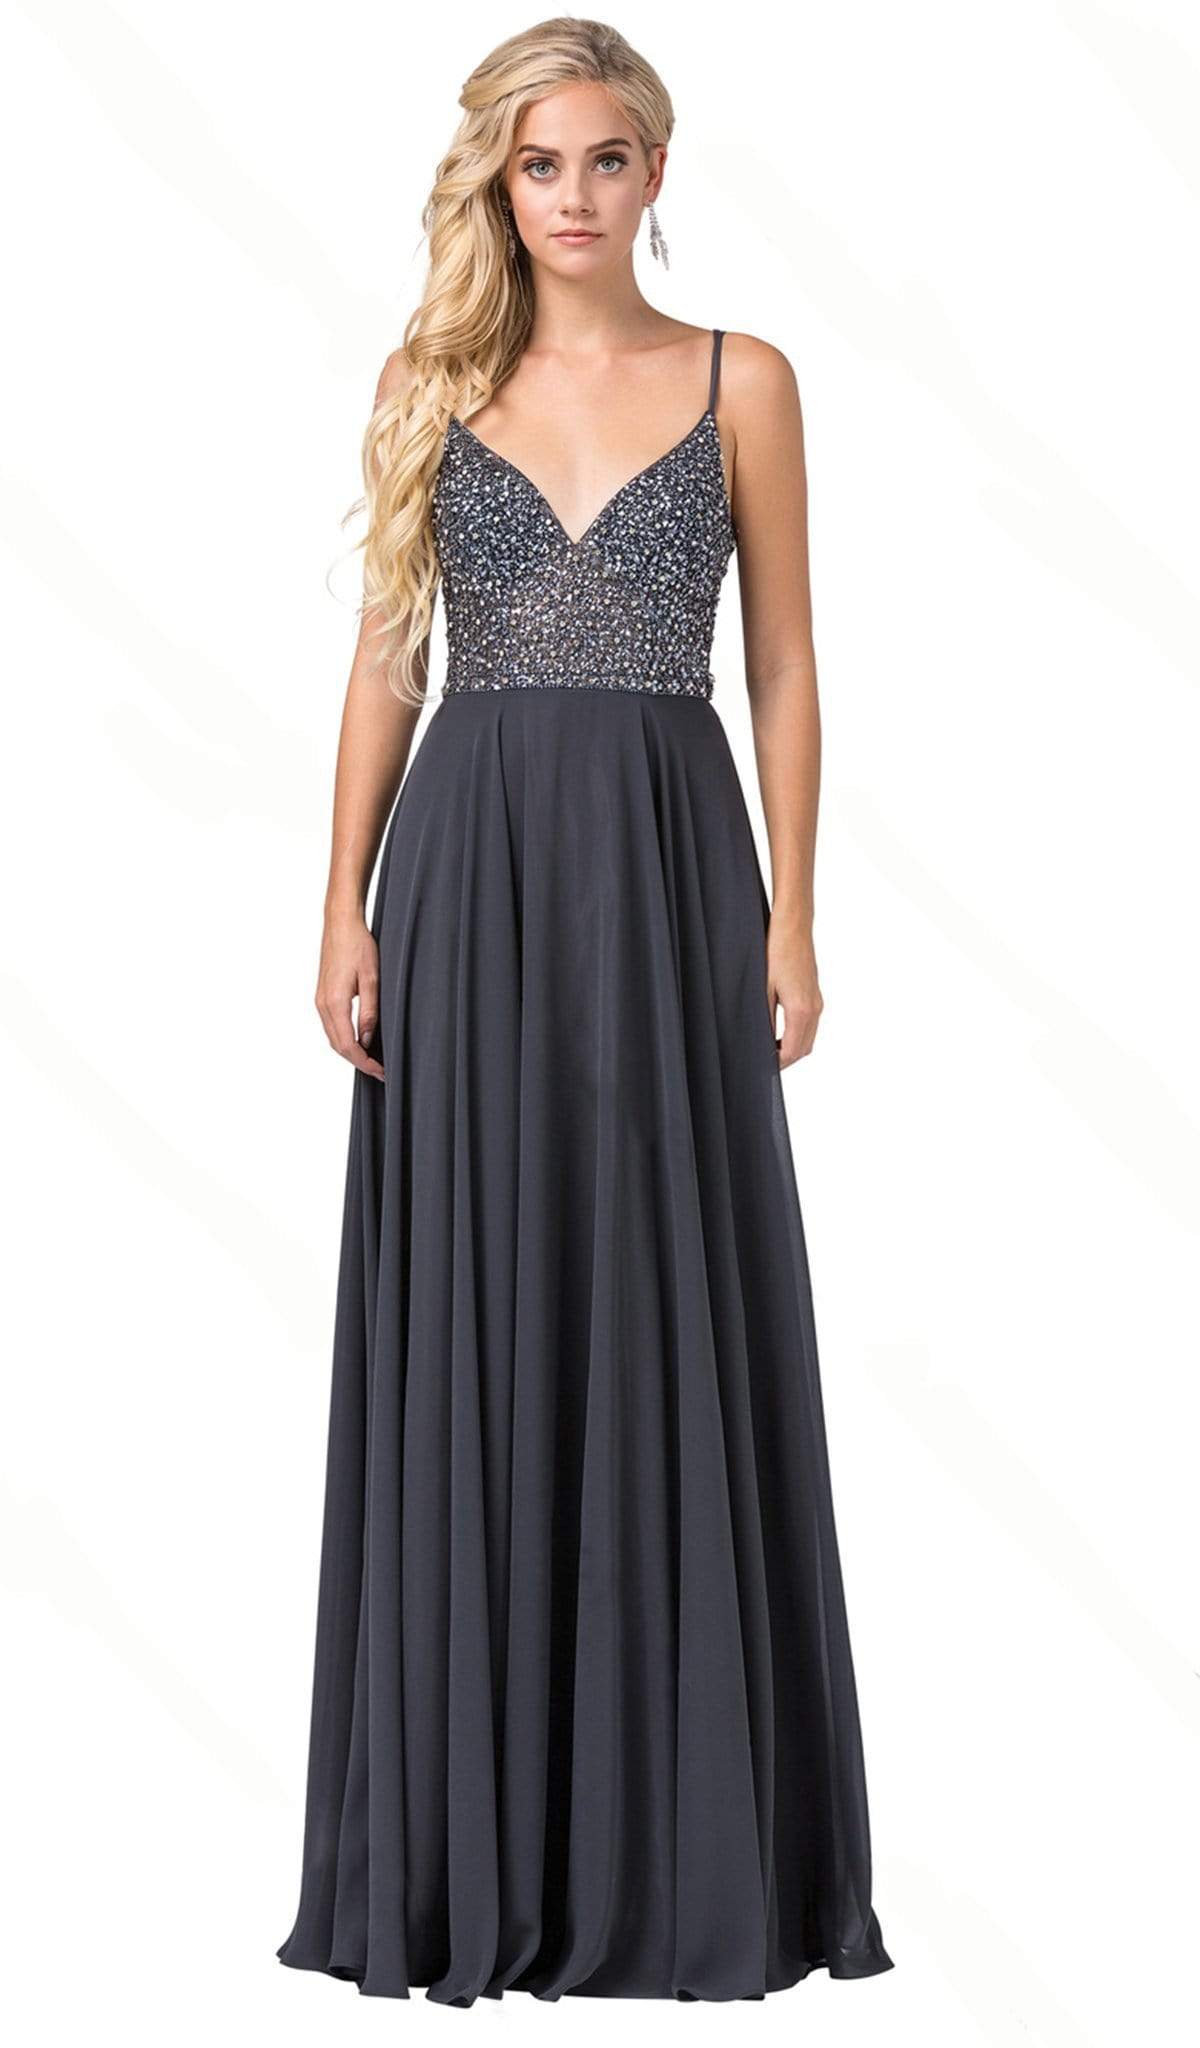 Image of Dancing Queen - 2648 Beaded V-Neck A-Line Prom Dress